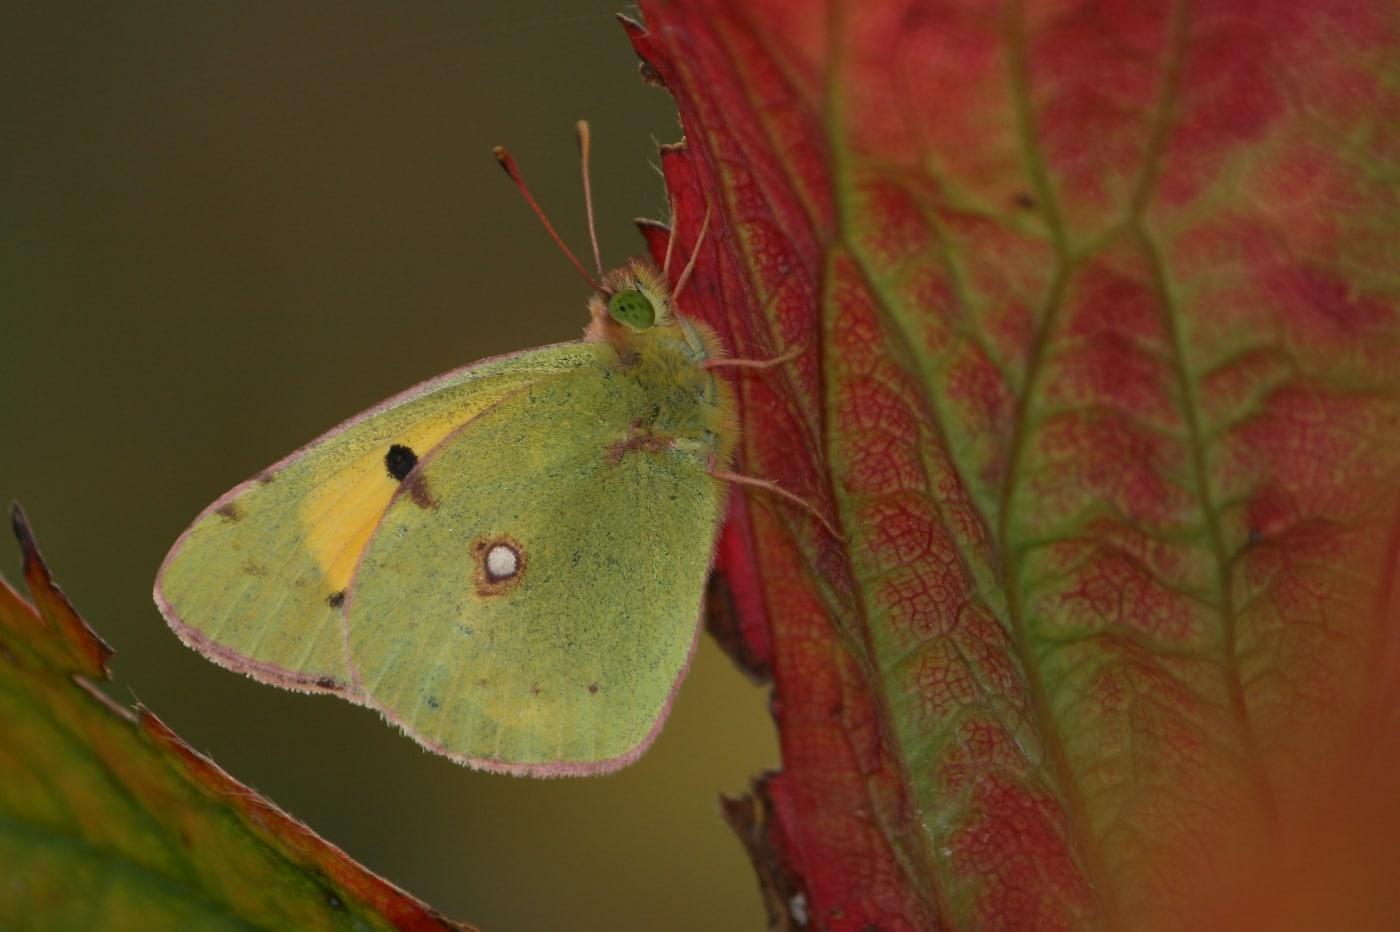 Northern Clouded Yellow. Photo by Dean Morley